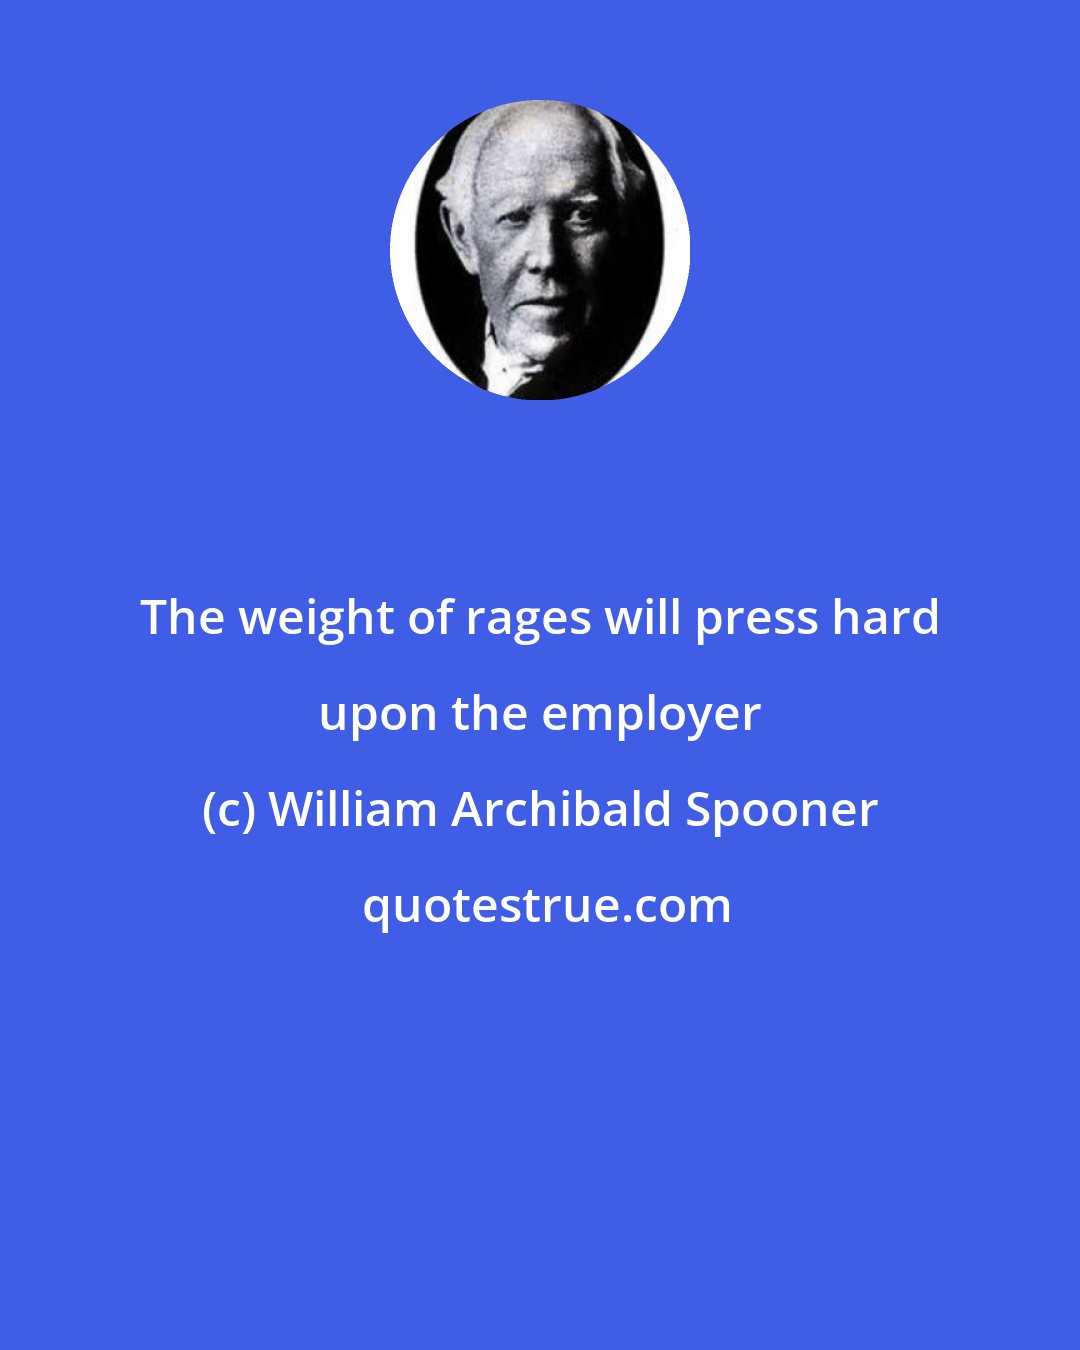 William Archibald Spooner: The weight of rages will press hard upon the employer